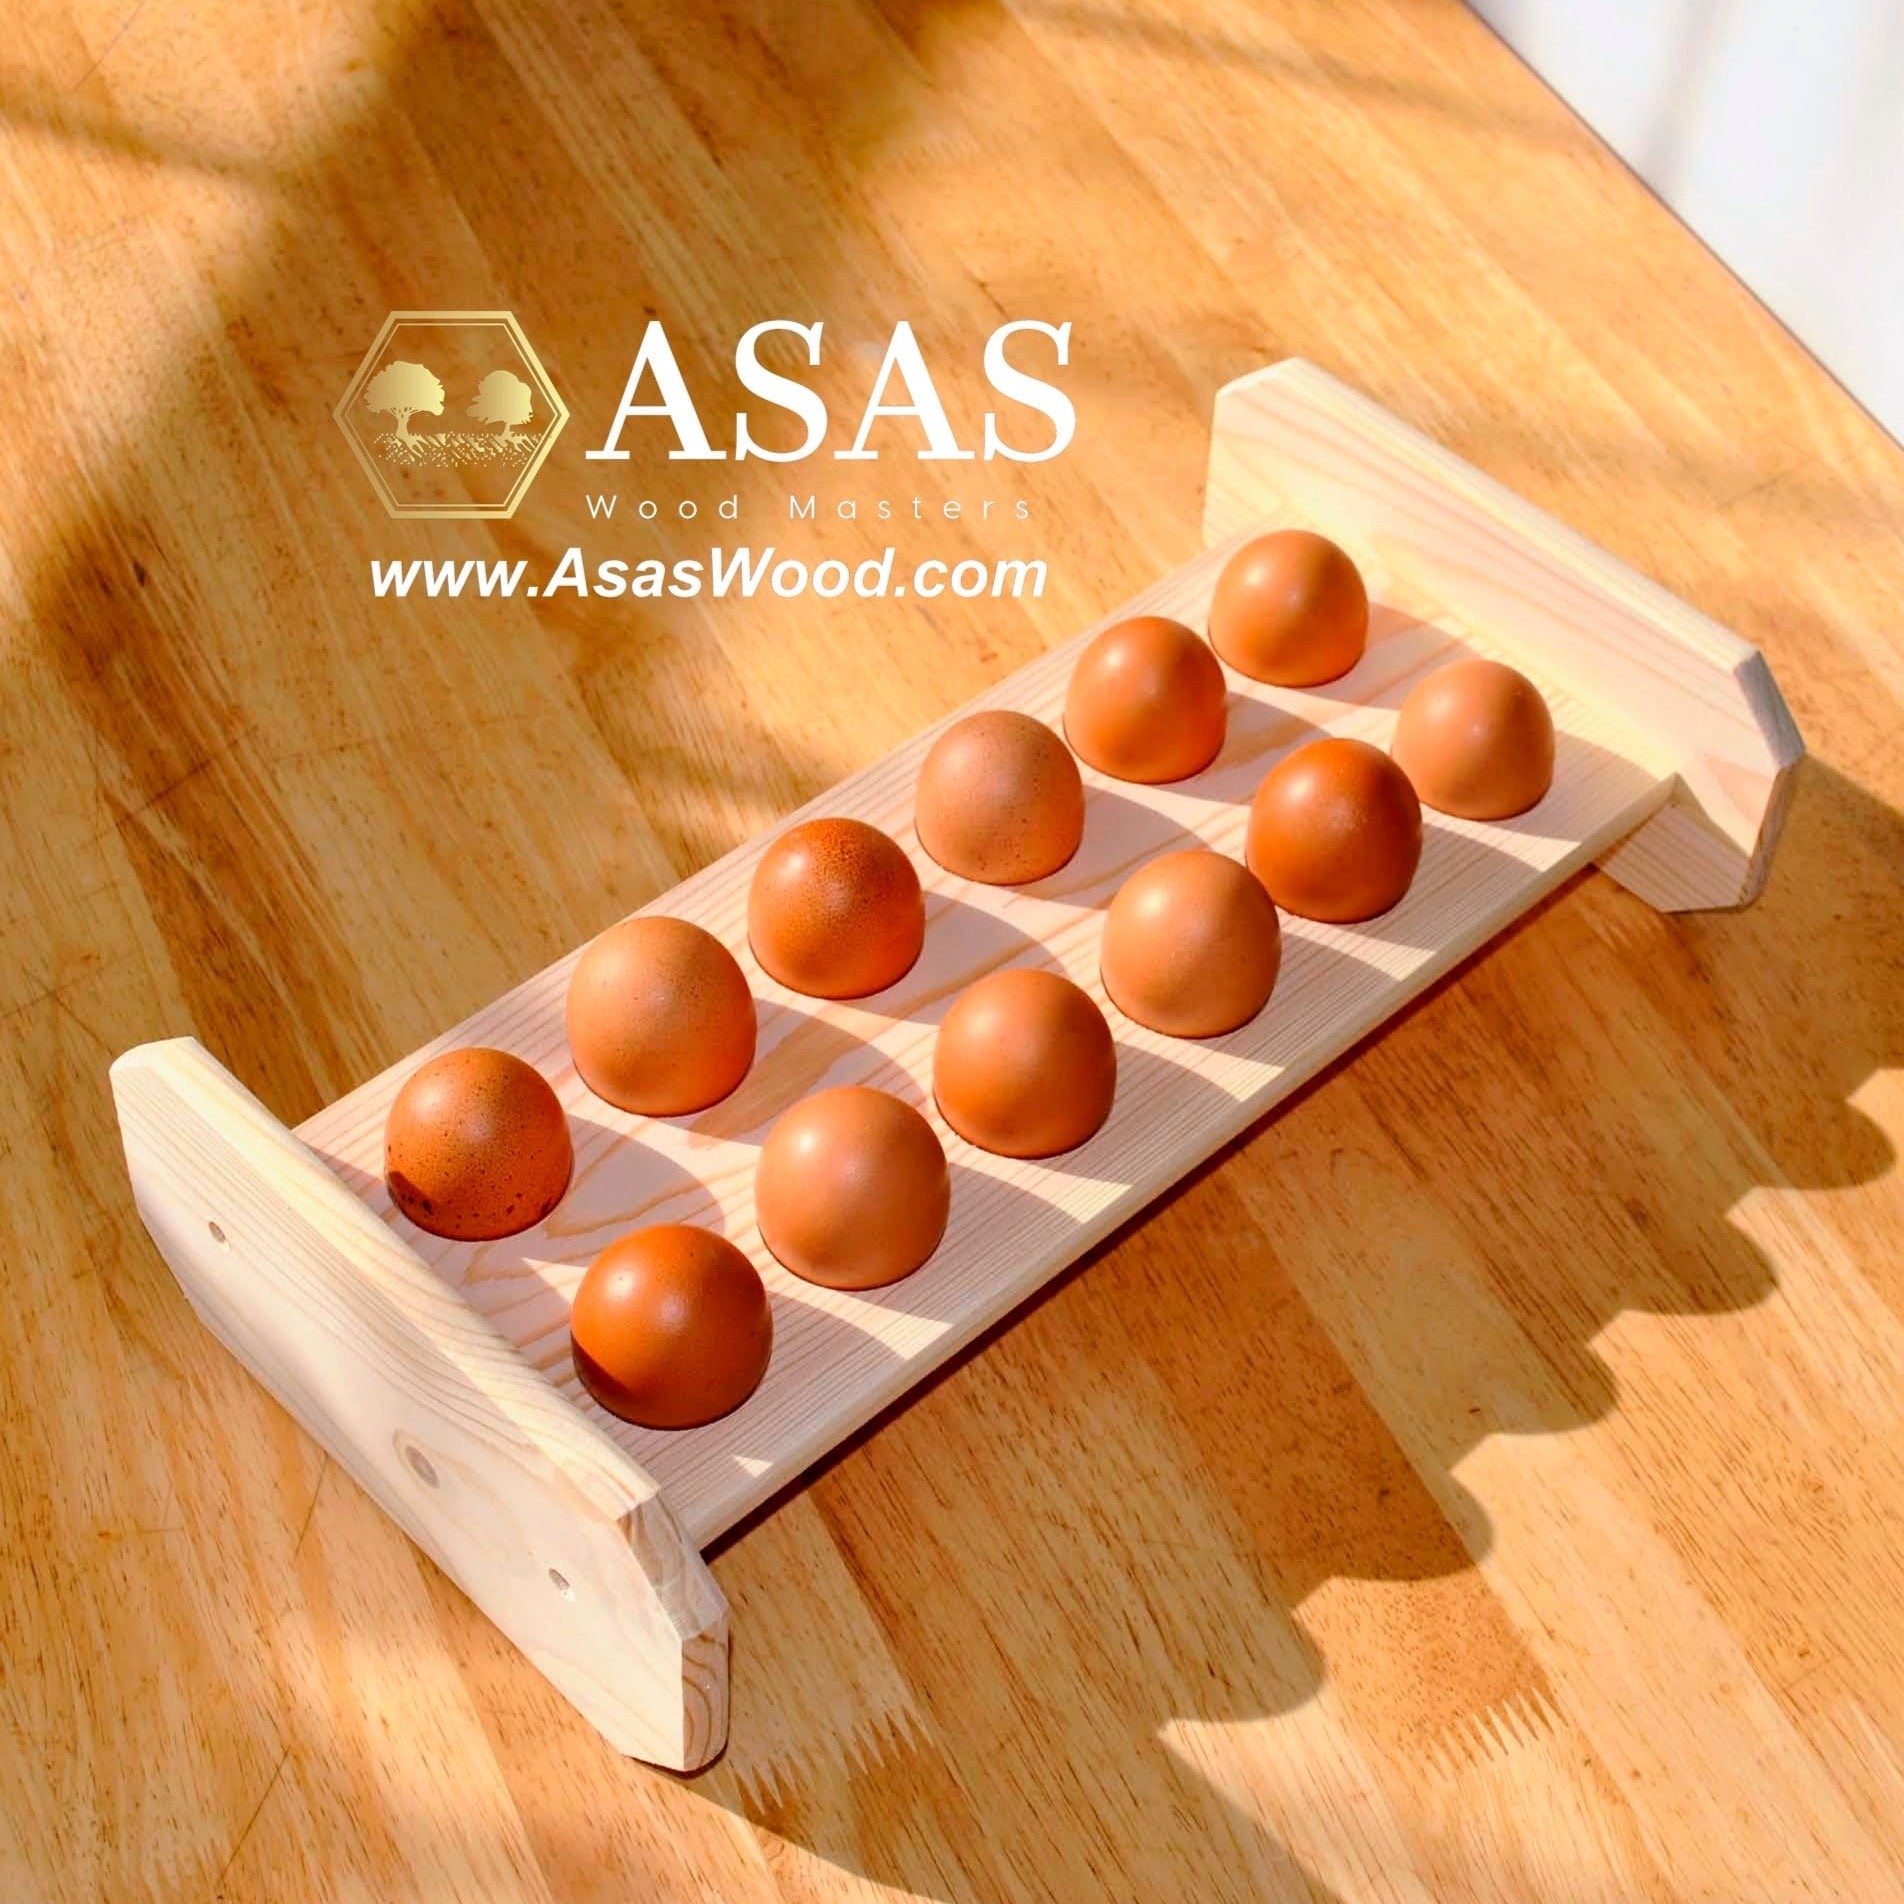 Wooden egg holder with eggs on the table, handmade, made by AsasWood